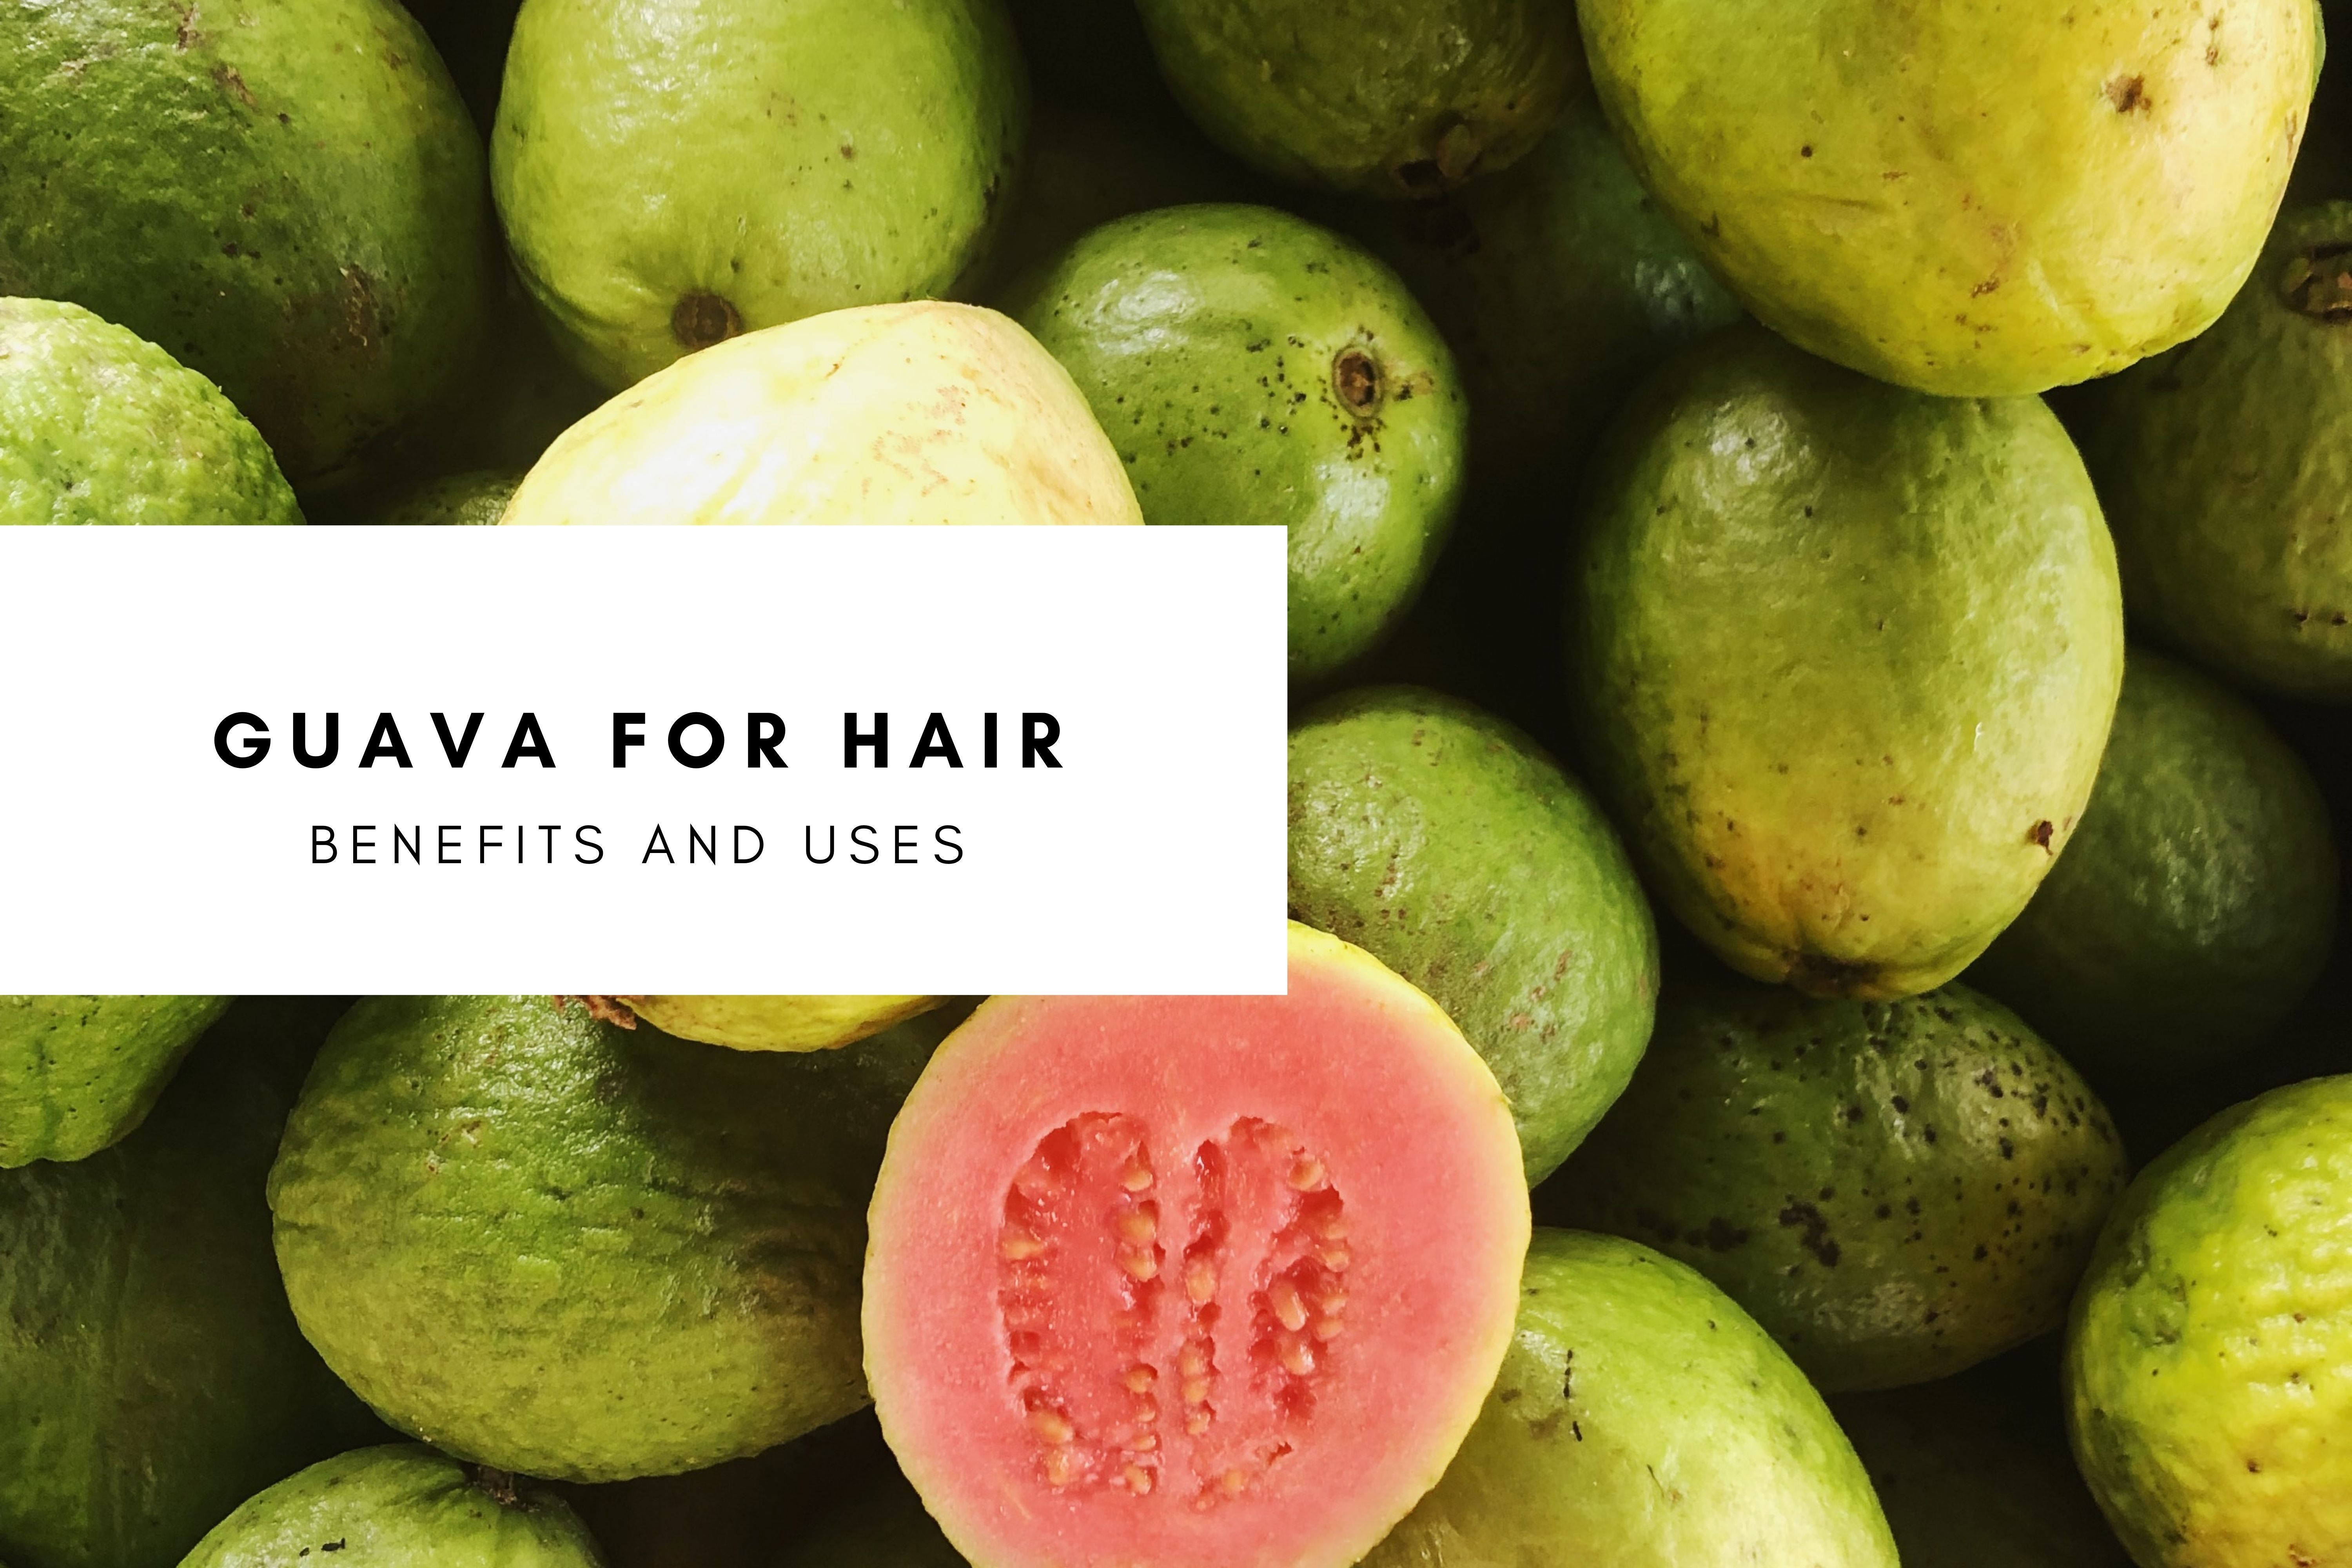 Guava For Hair: Benefits And Uses